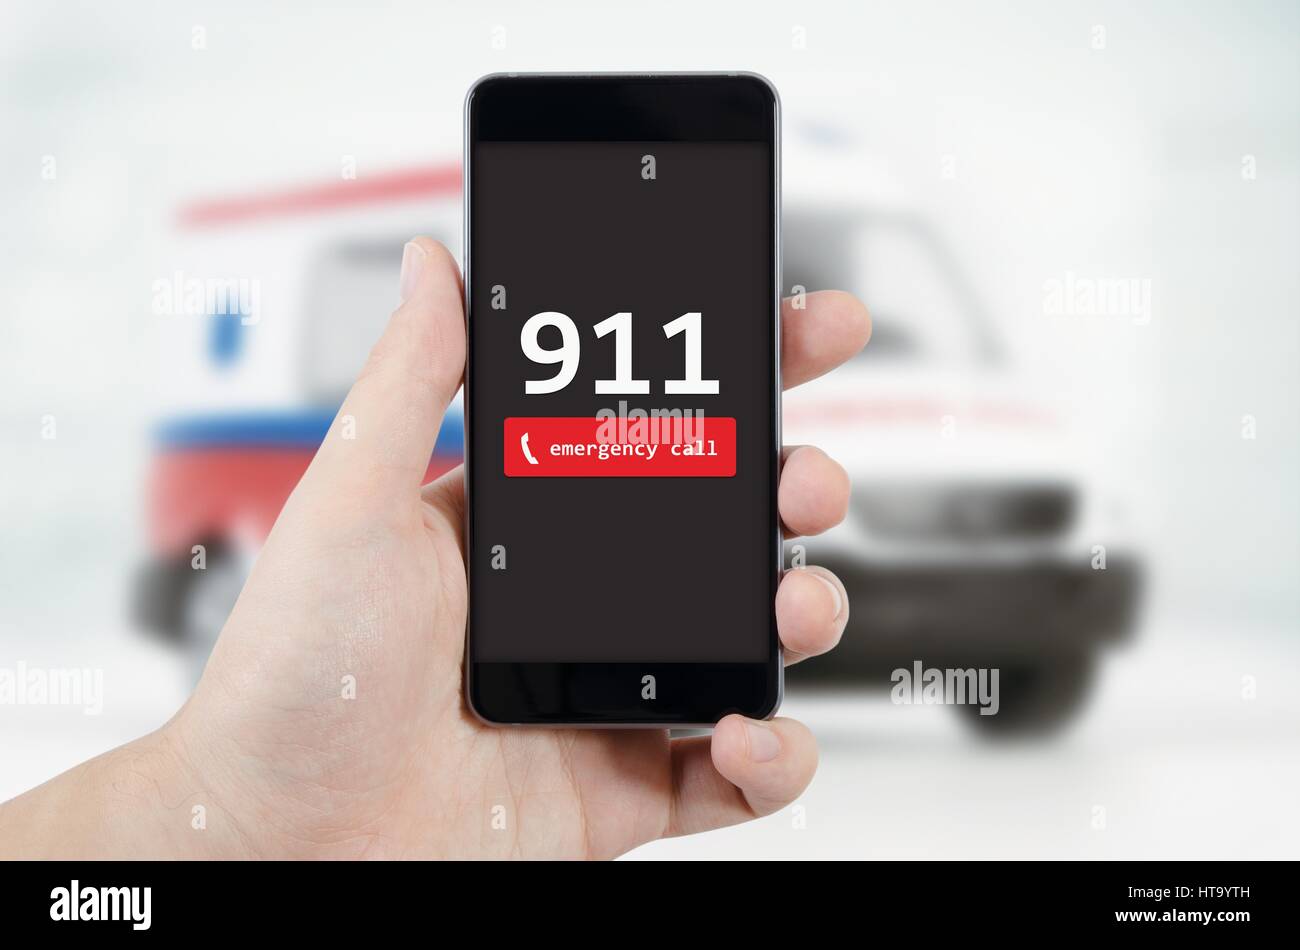 Man calling emergency. Ambulance in background. emergency call 911 aid man concept Stock Photo